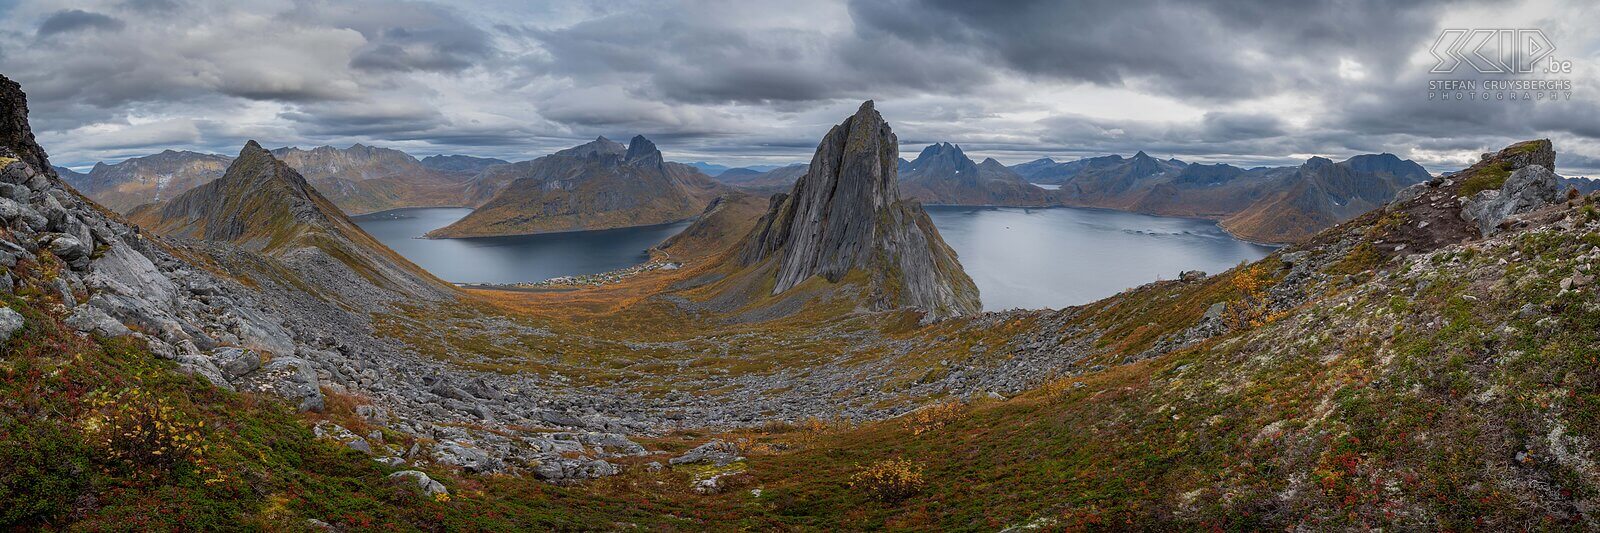 Norway - Senja - Segla - Panorama Panoramic image with the Oyfjorden on the left, the beautiful rocky peak of the Segla in the middle and the Mefjorden on the right Stefan Cruysberghs